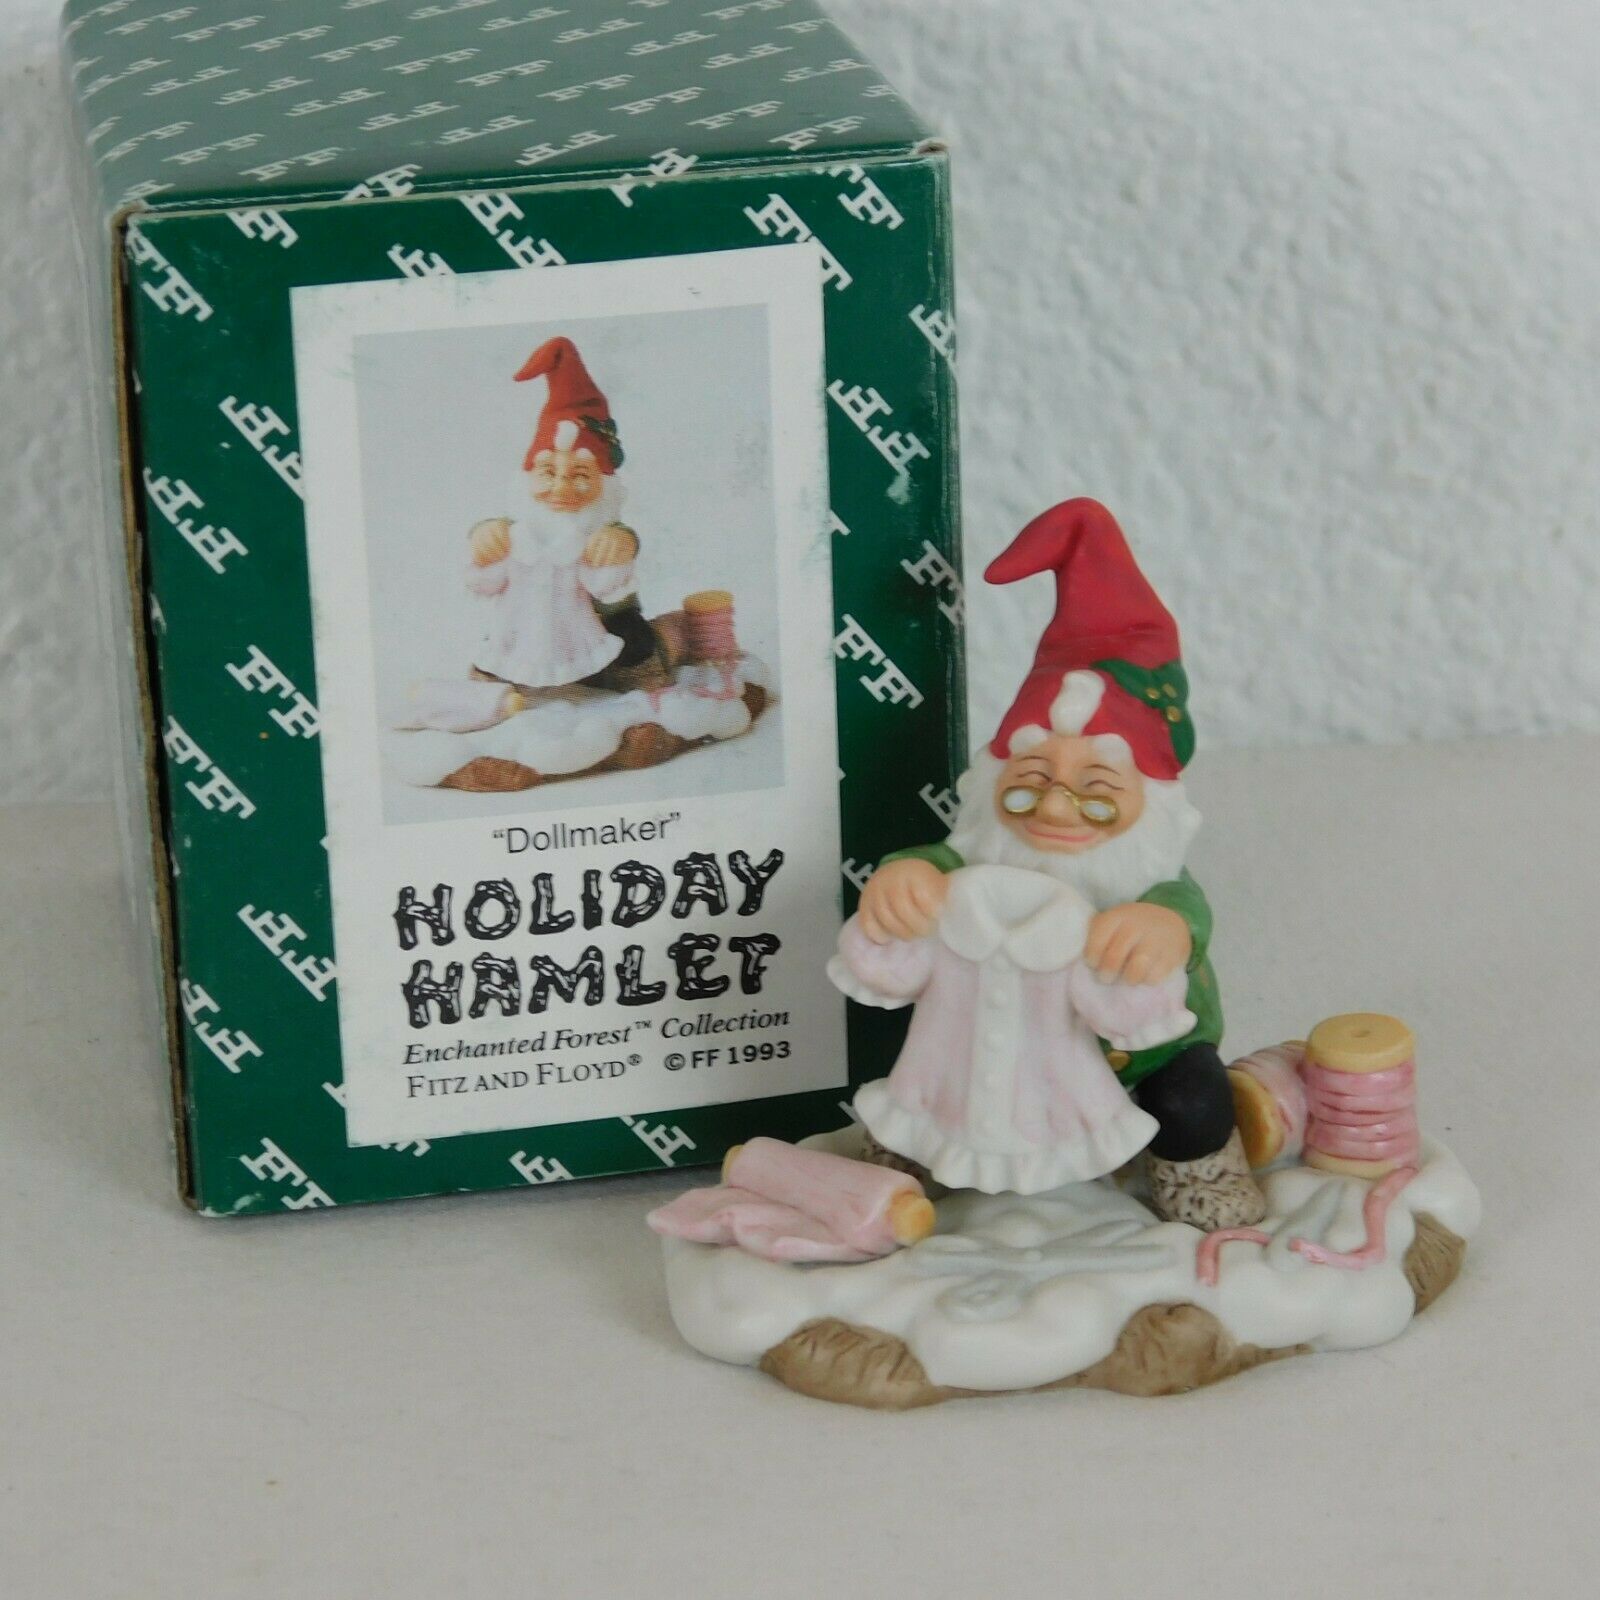 Fitz Floyd Holiday Hamlet Dollmaker Enchanted Forest 19/733 With Original Box - $14.52